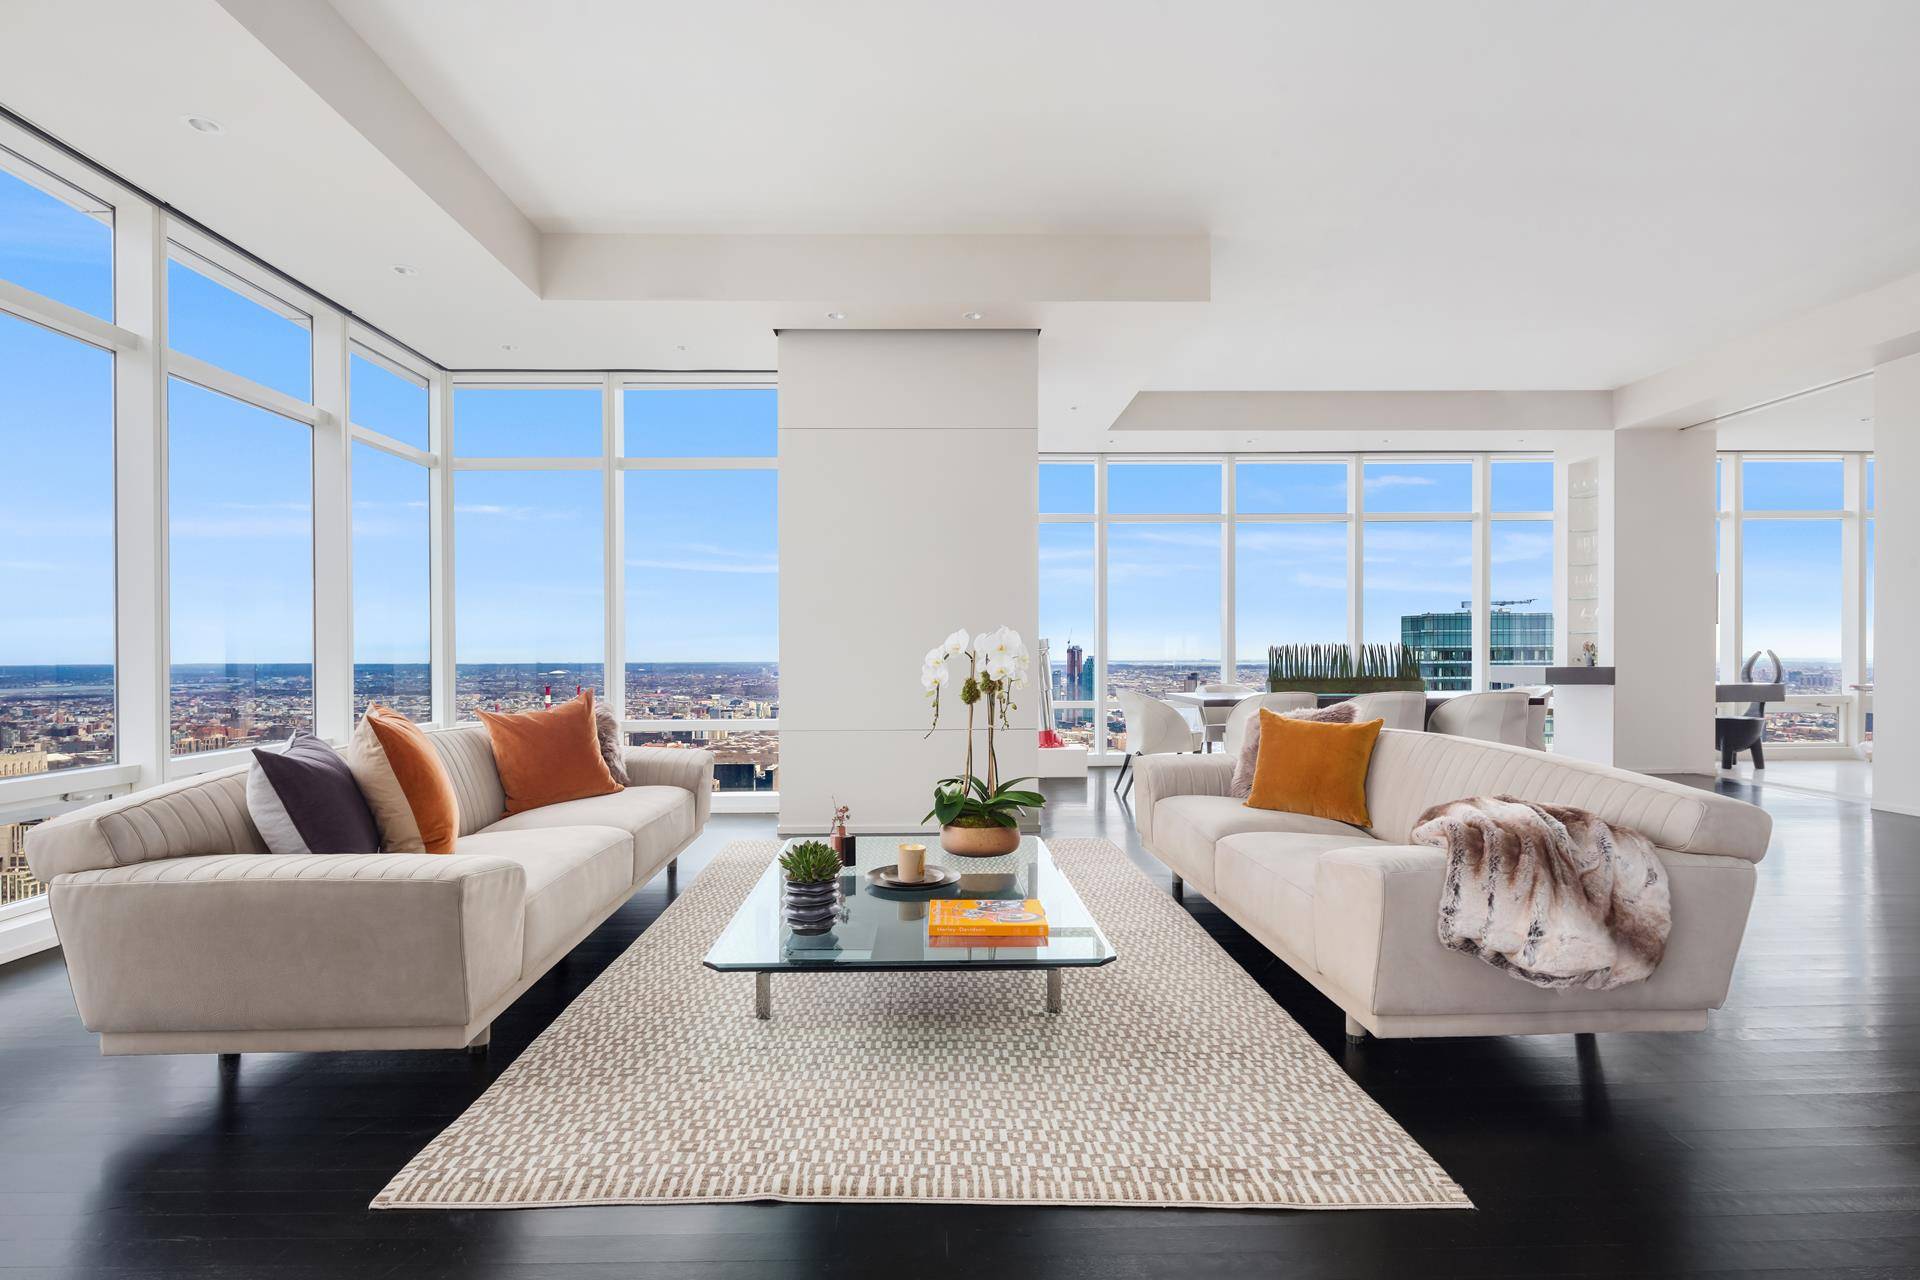 Make your home high above the city skyline in this breathtaking three bedroom, three and a half bathroom residence beautifully renovated by AD100 interior designer Suzanne Lovell.